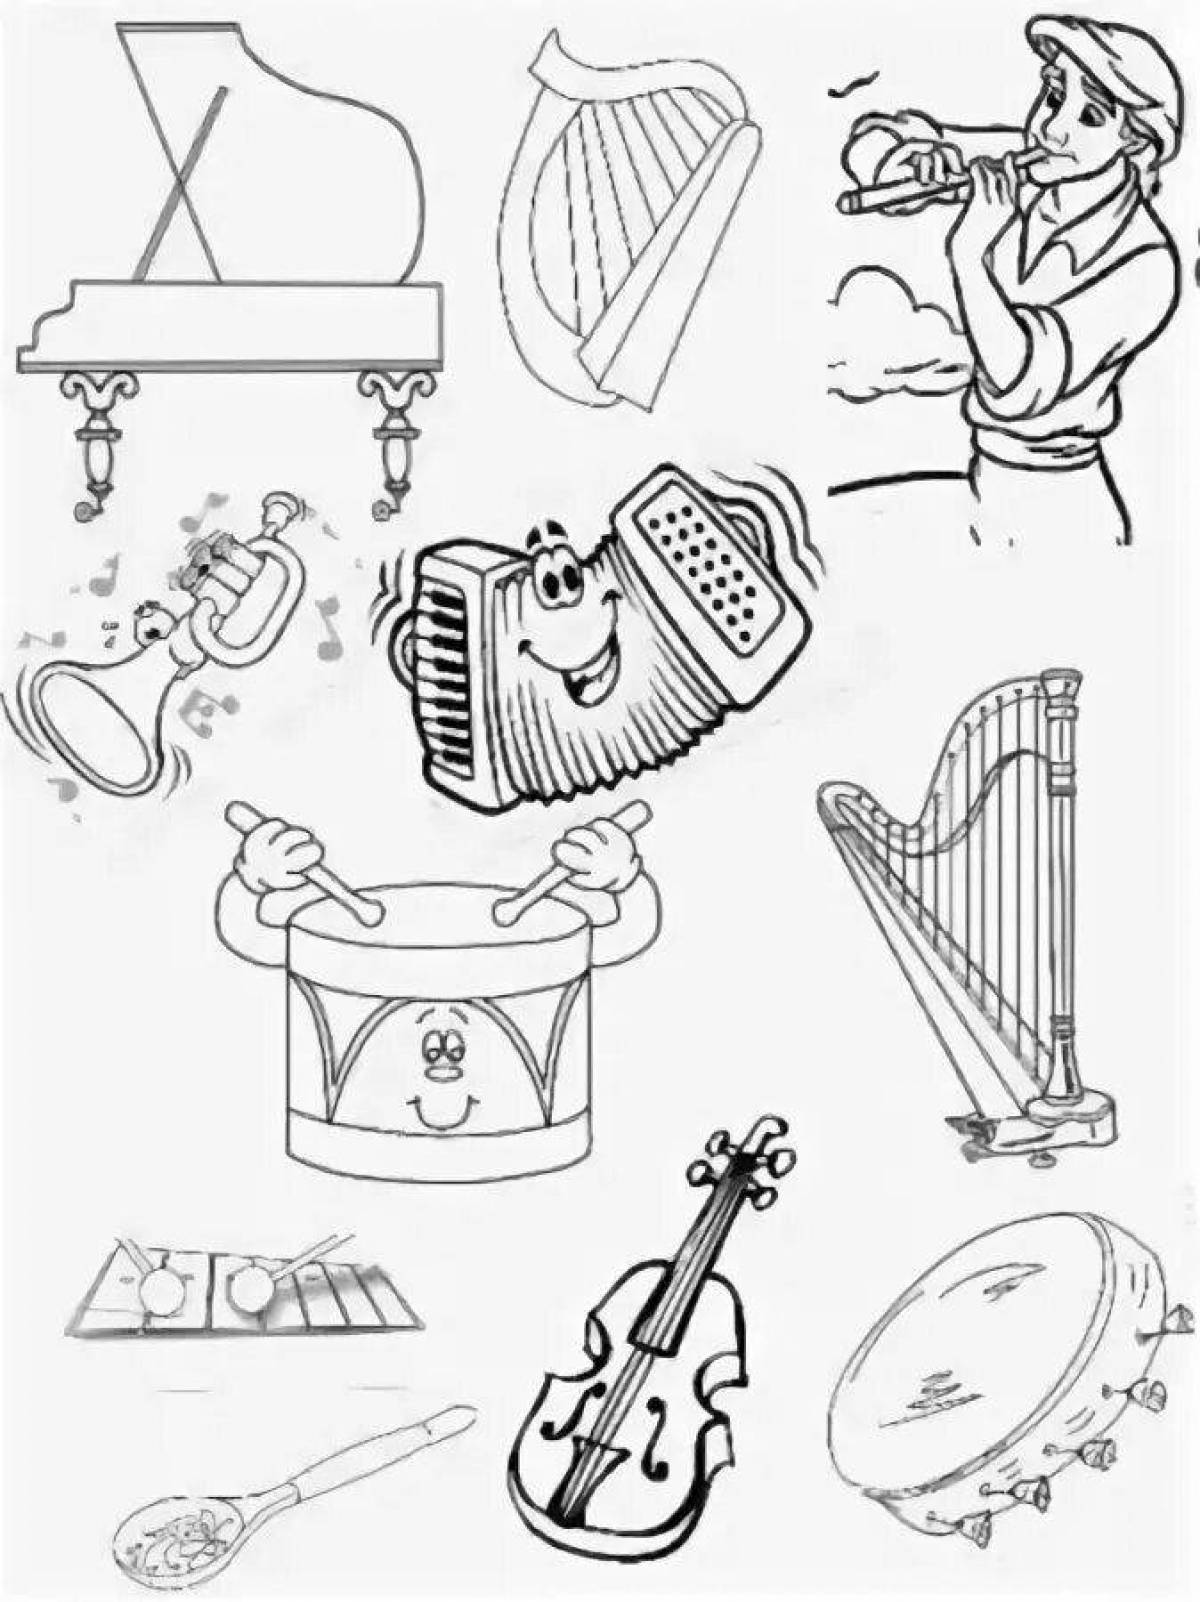 Exalted folk instruments coloring book